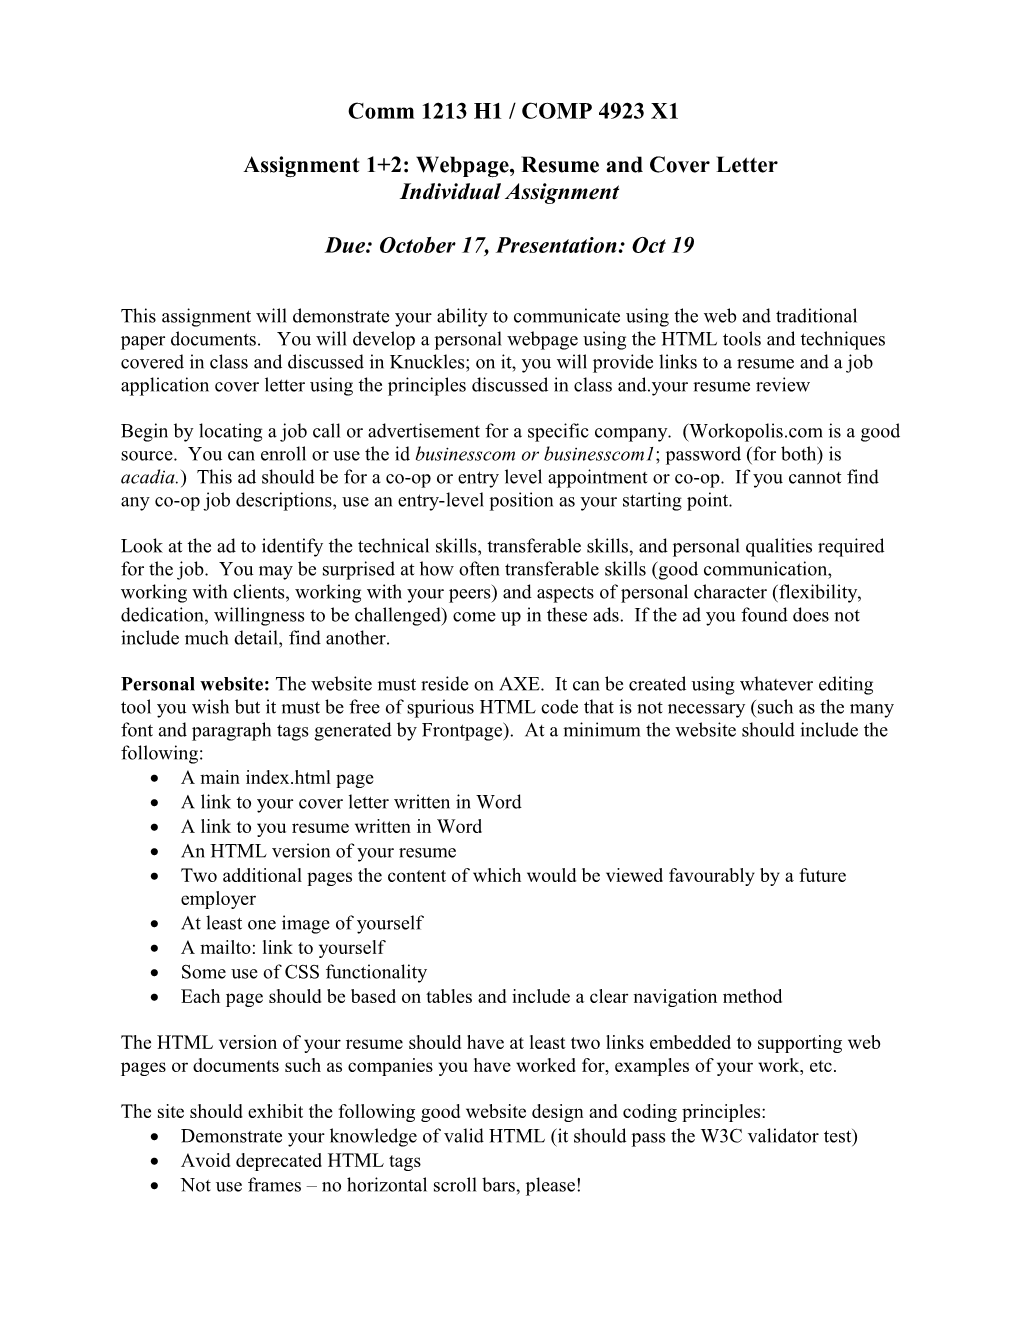 Assignment 1+2: Webpage, Resume and Cover Letter